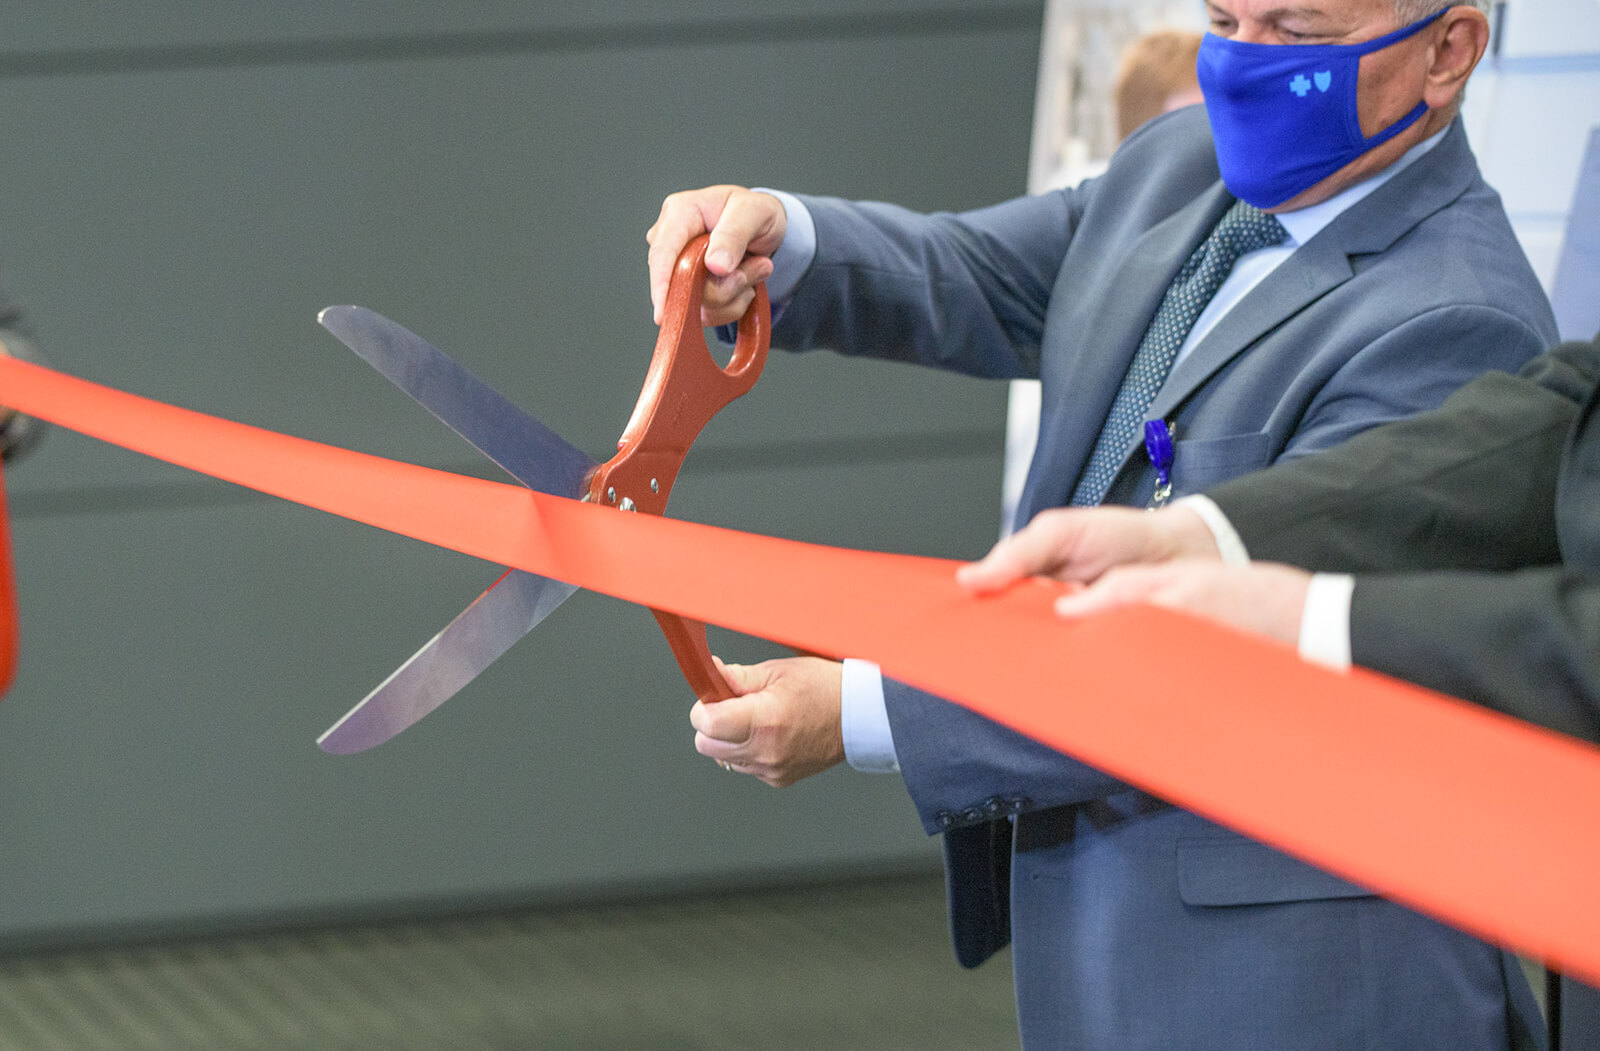 Ribbon Cutting during the Announcement of the Phoenix VA Health Care System (PVAHCS) Research Space